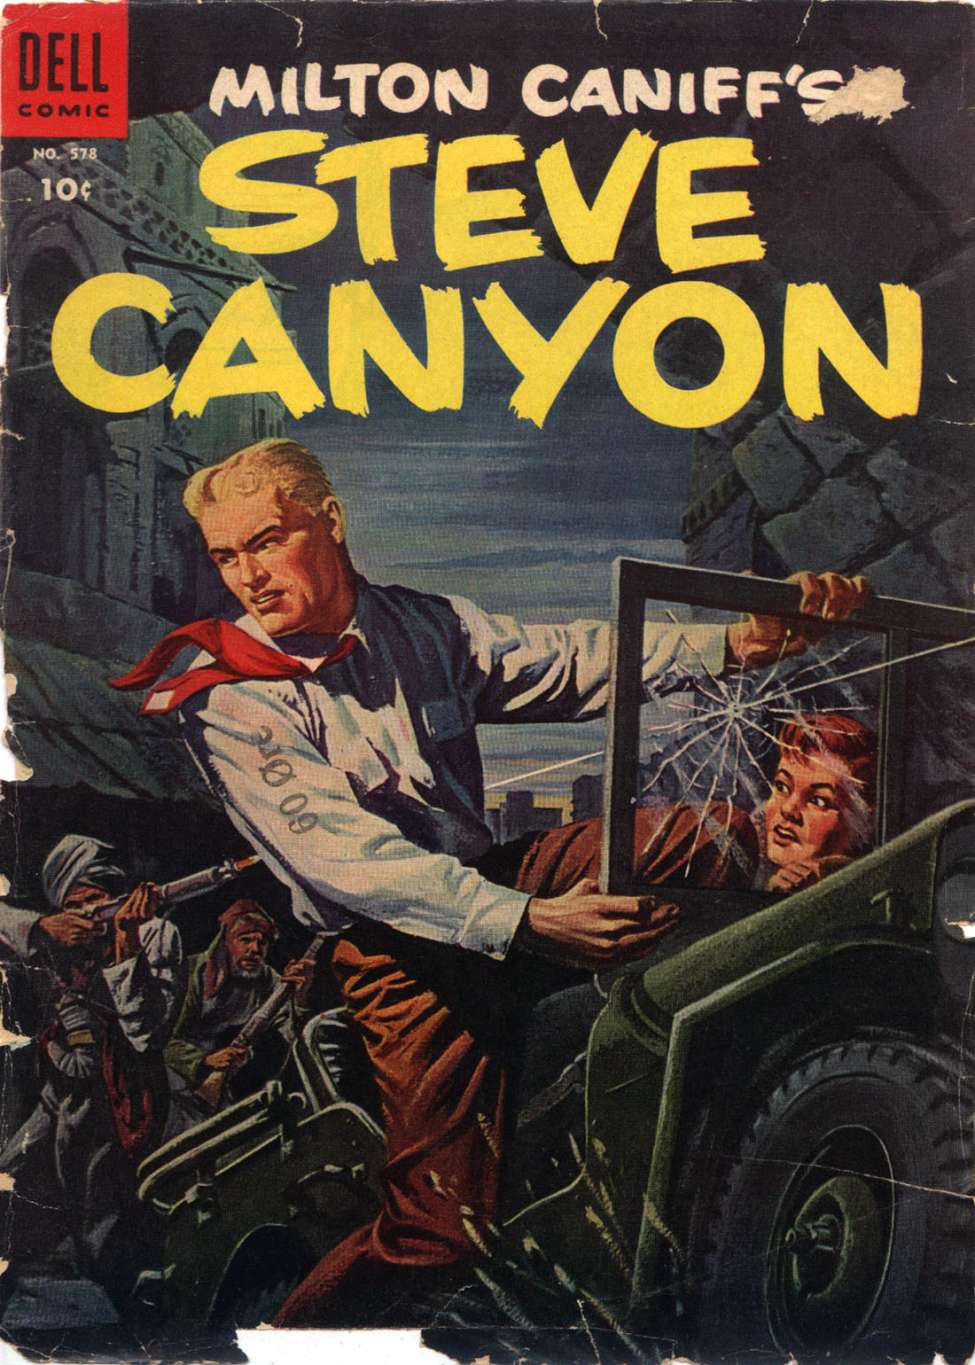 Book Cover For 0578 - Milton Caniff's Steve Canyon